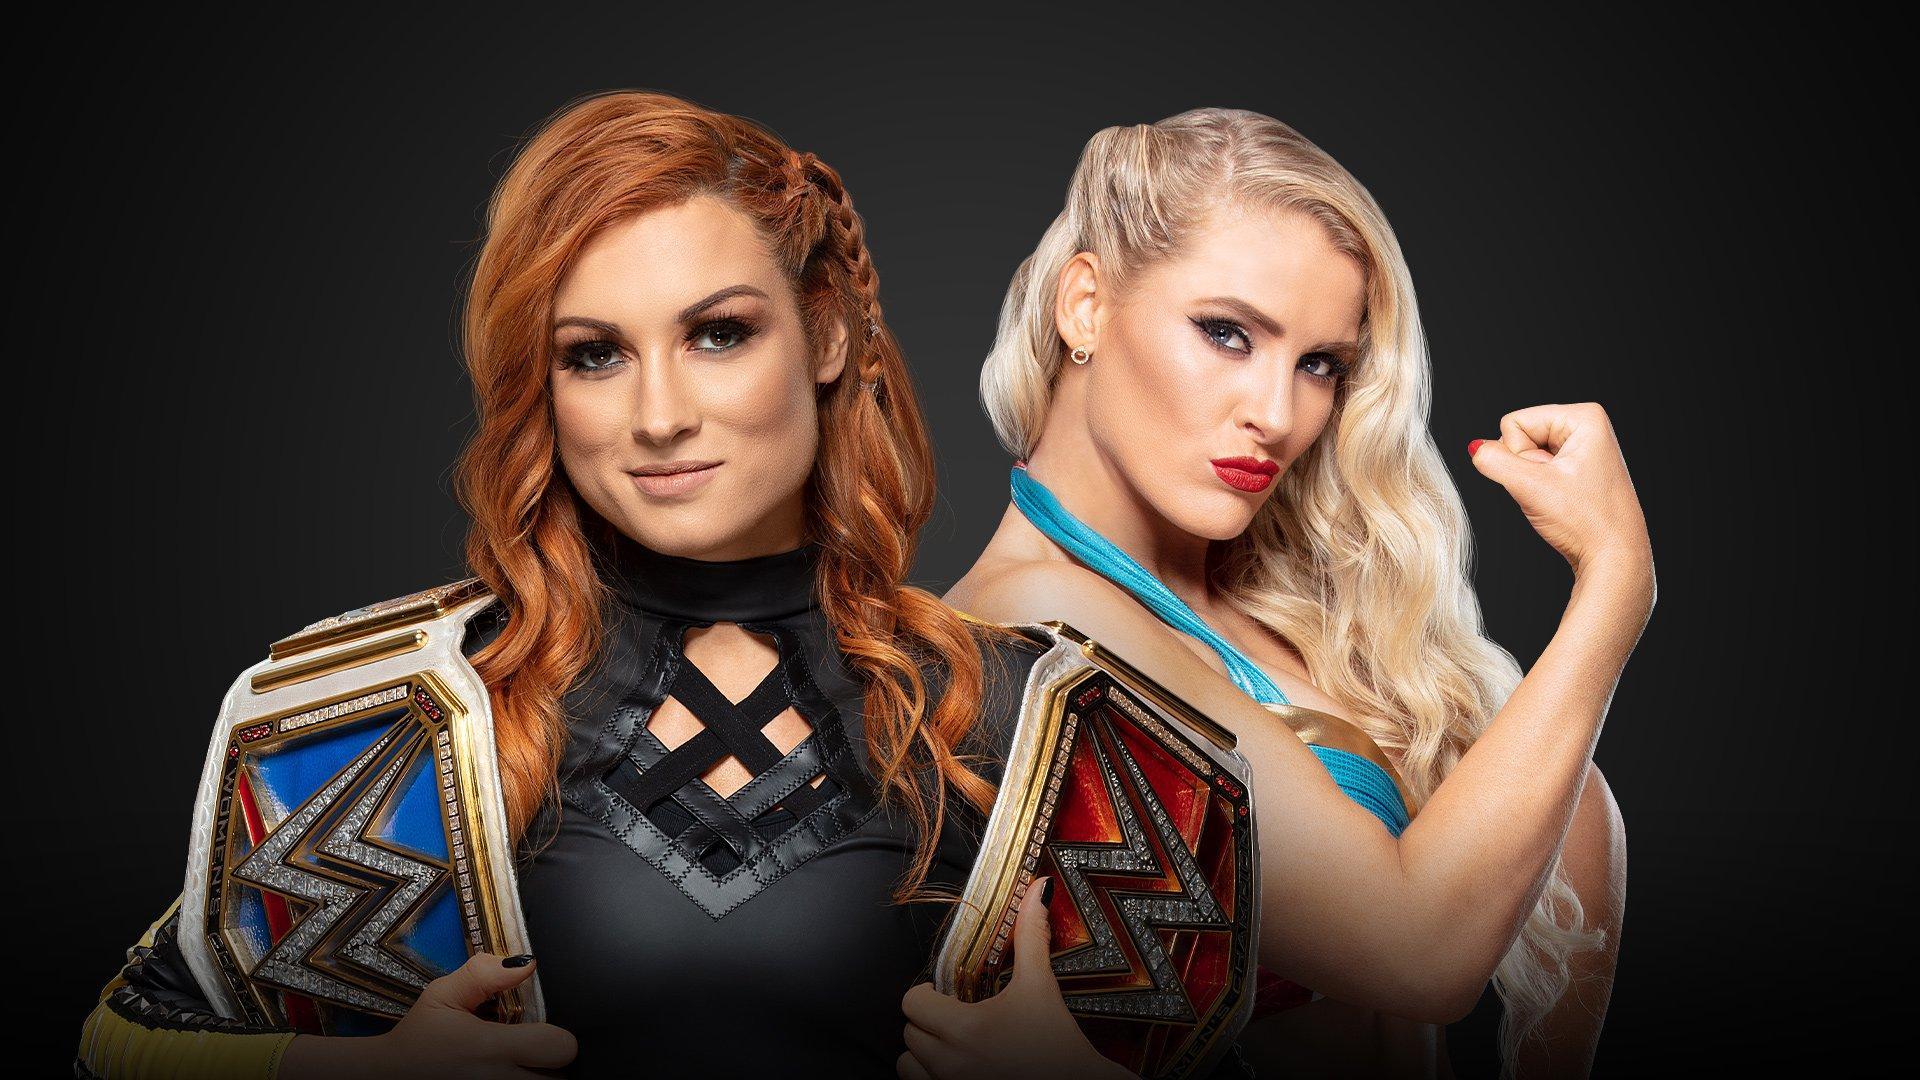 Becky Lynch vs. Lacey Evans official for WWE Money in the Bank